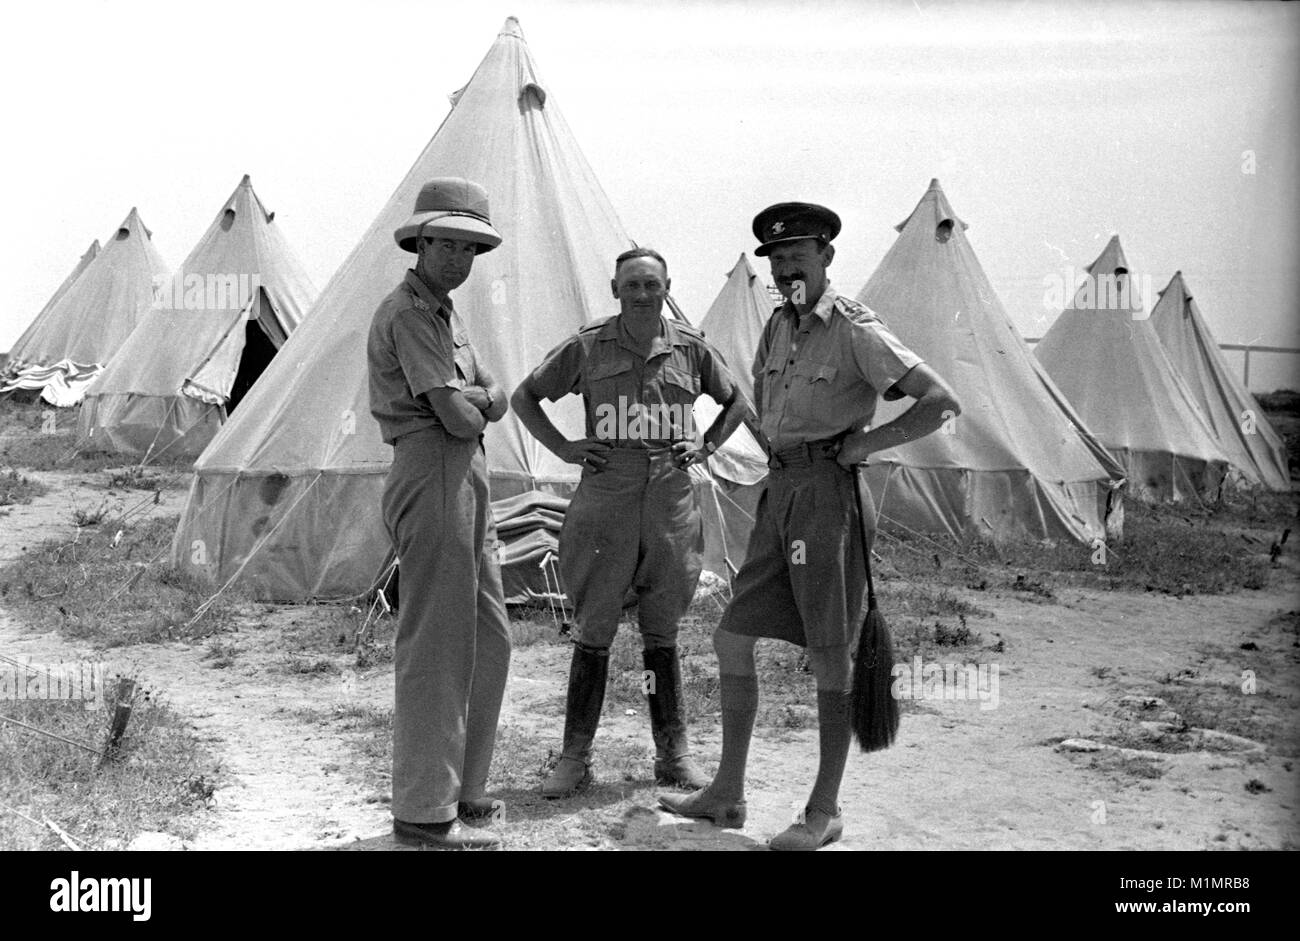 British army officers soldiers standing next to tents in Palestine 1940 Stock Photo